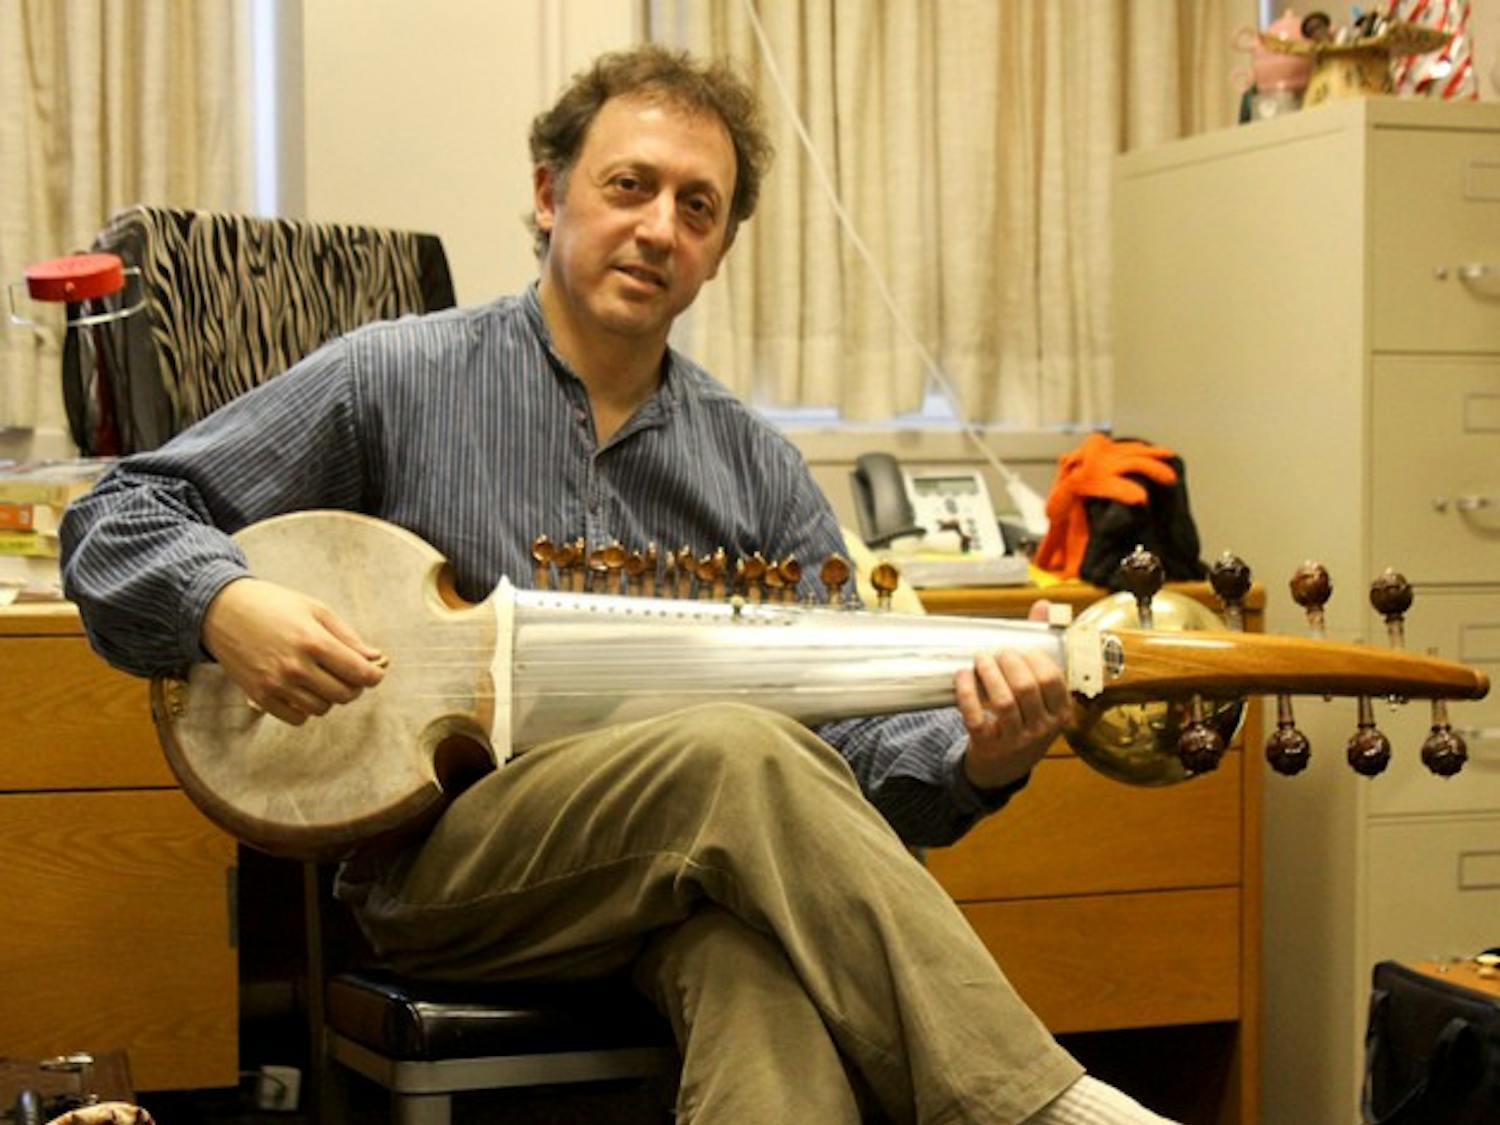 Visiting professor Ken Zuckerman has achieved international fame for his work on the sarod, a stringed instrument common in classical Indian music.